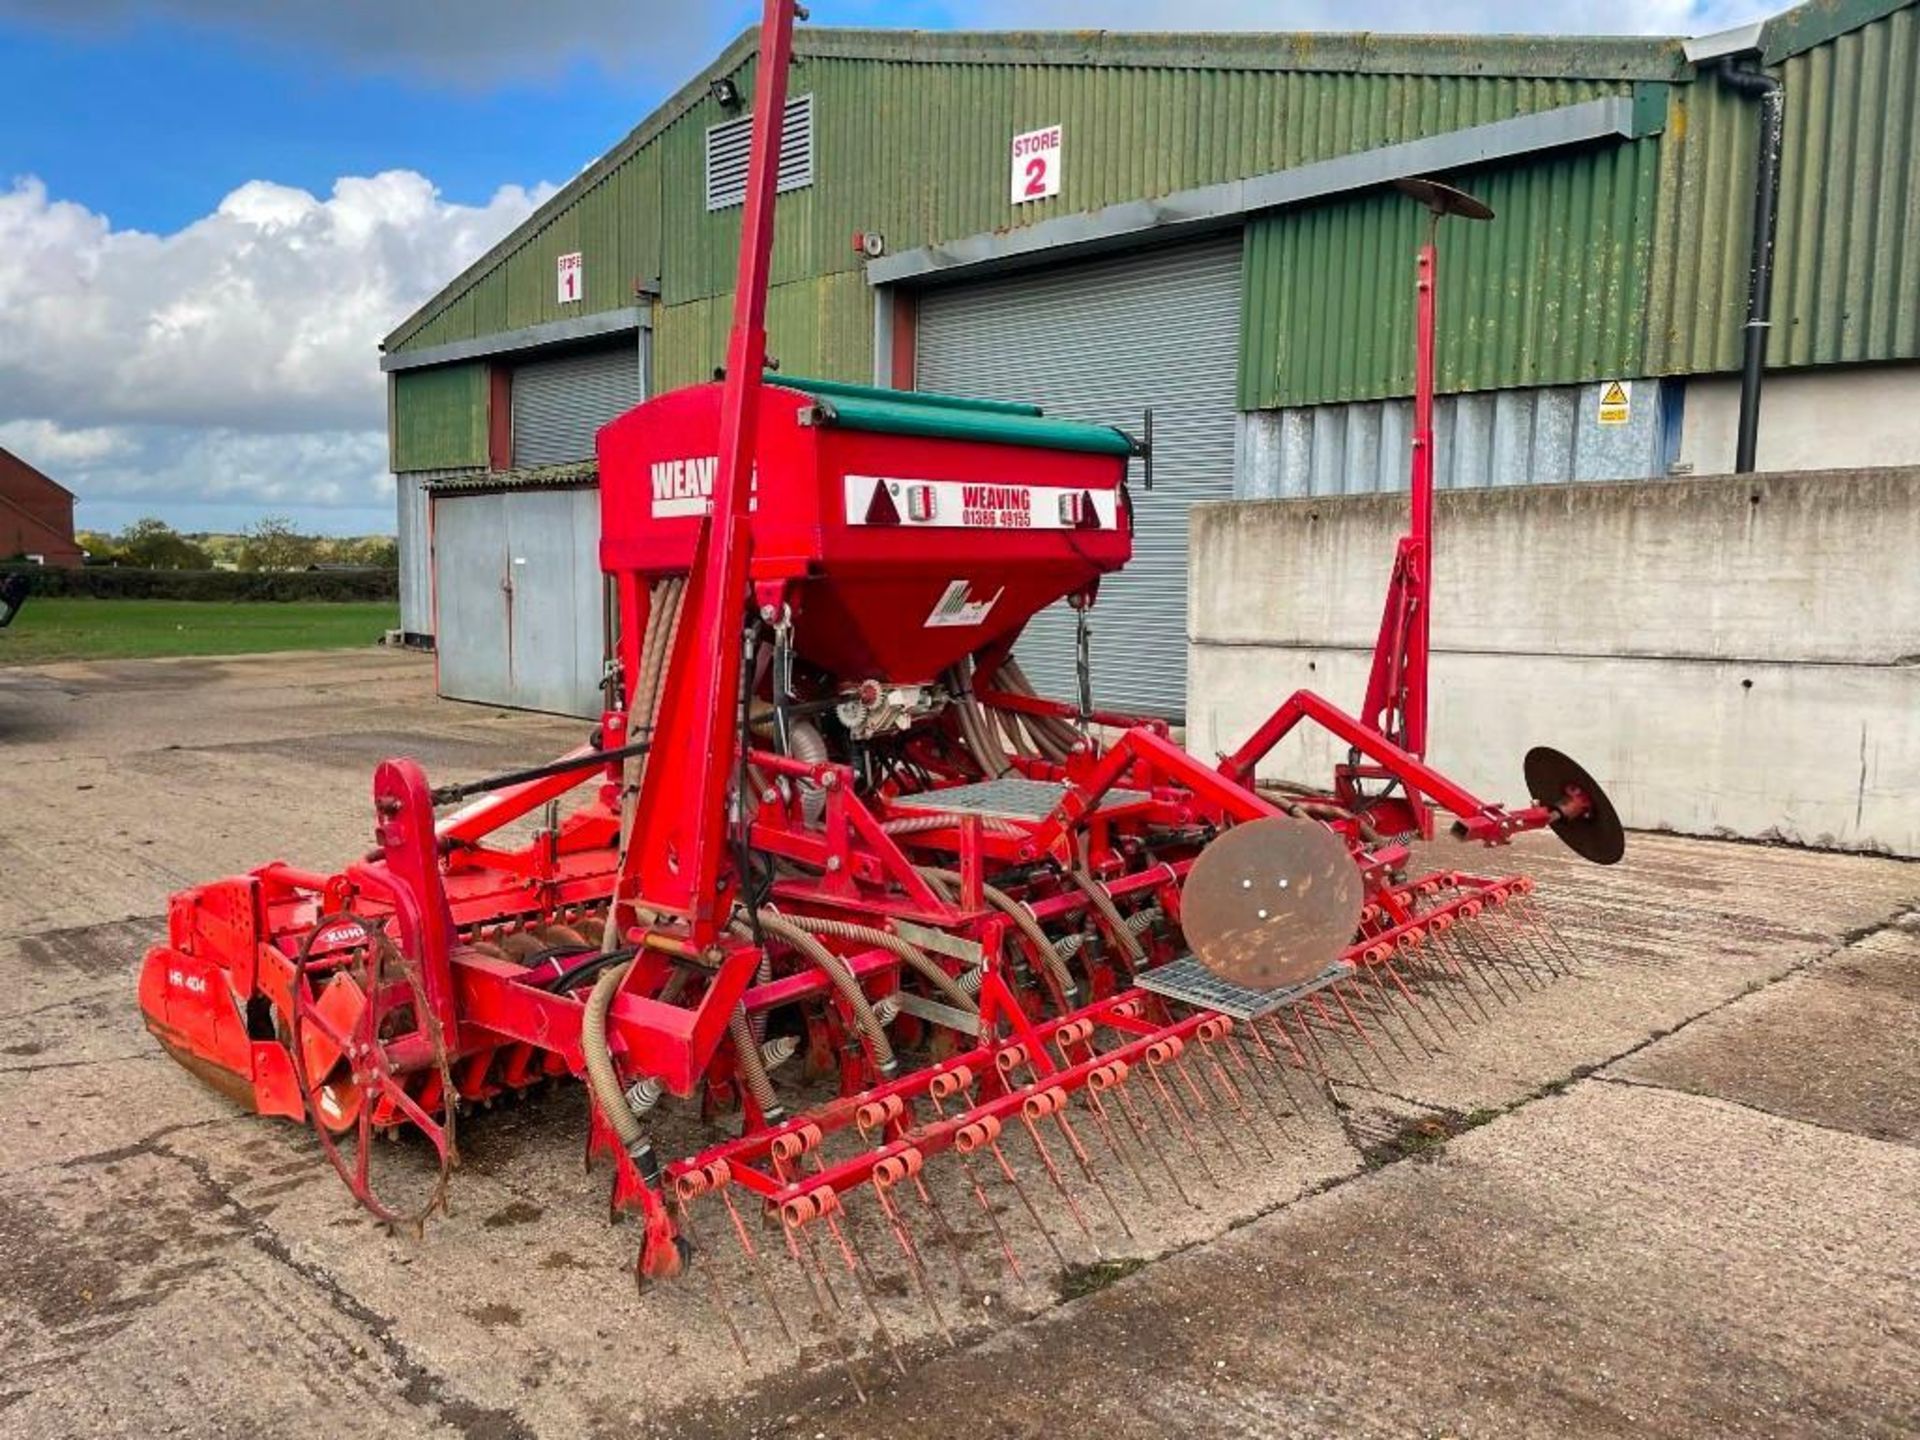 Kuhn HR404 Power Harrow Combination Drill with Weaving Tine Drill